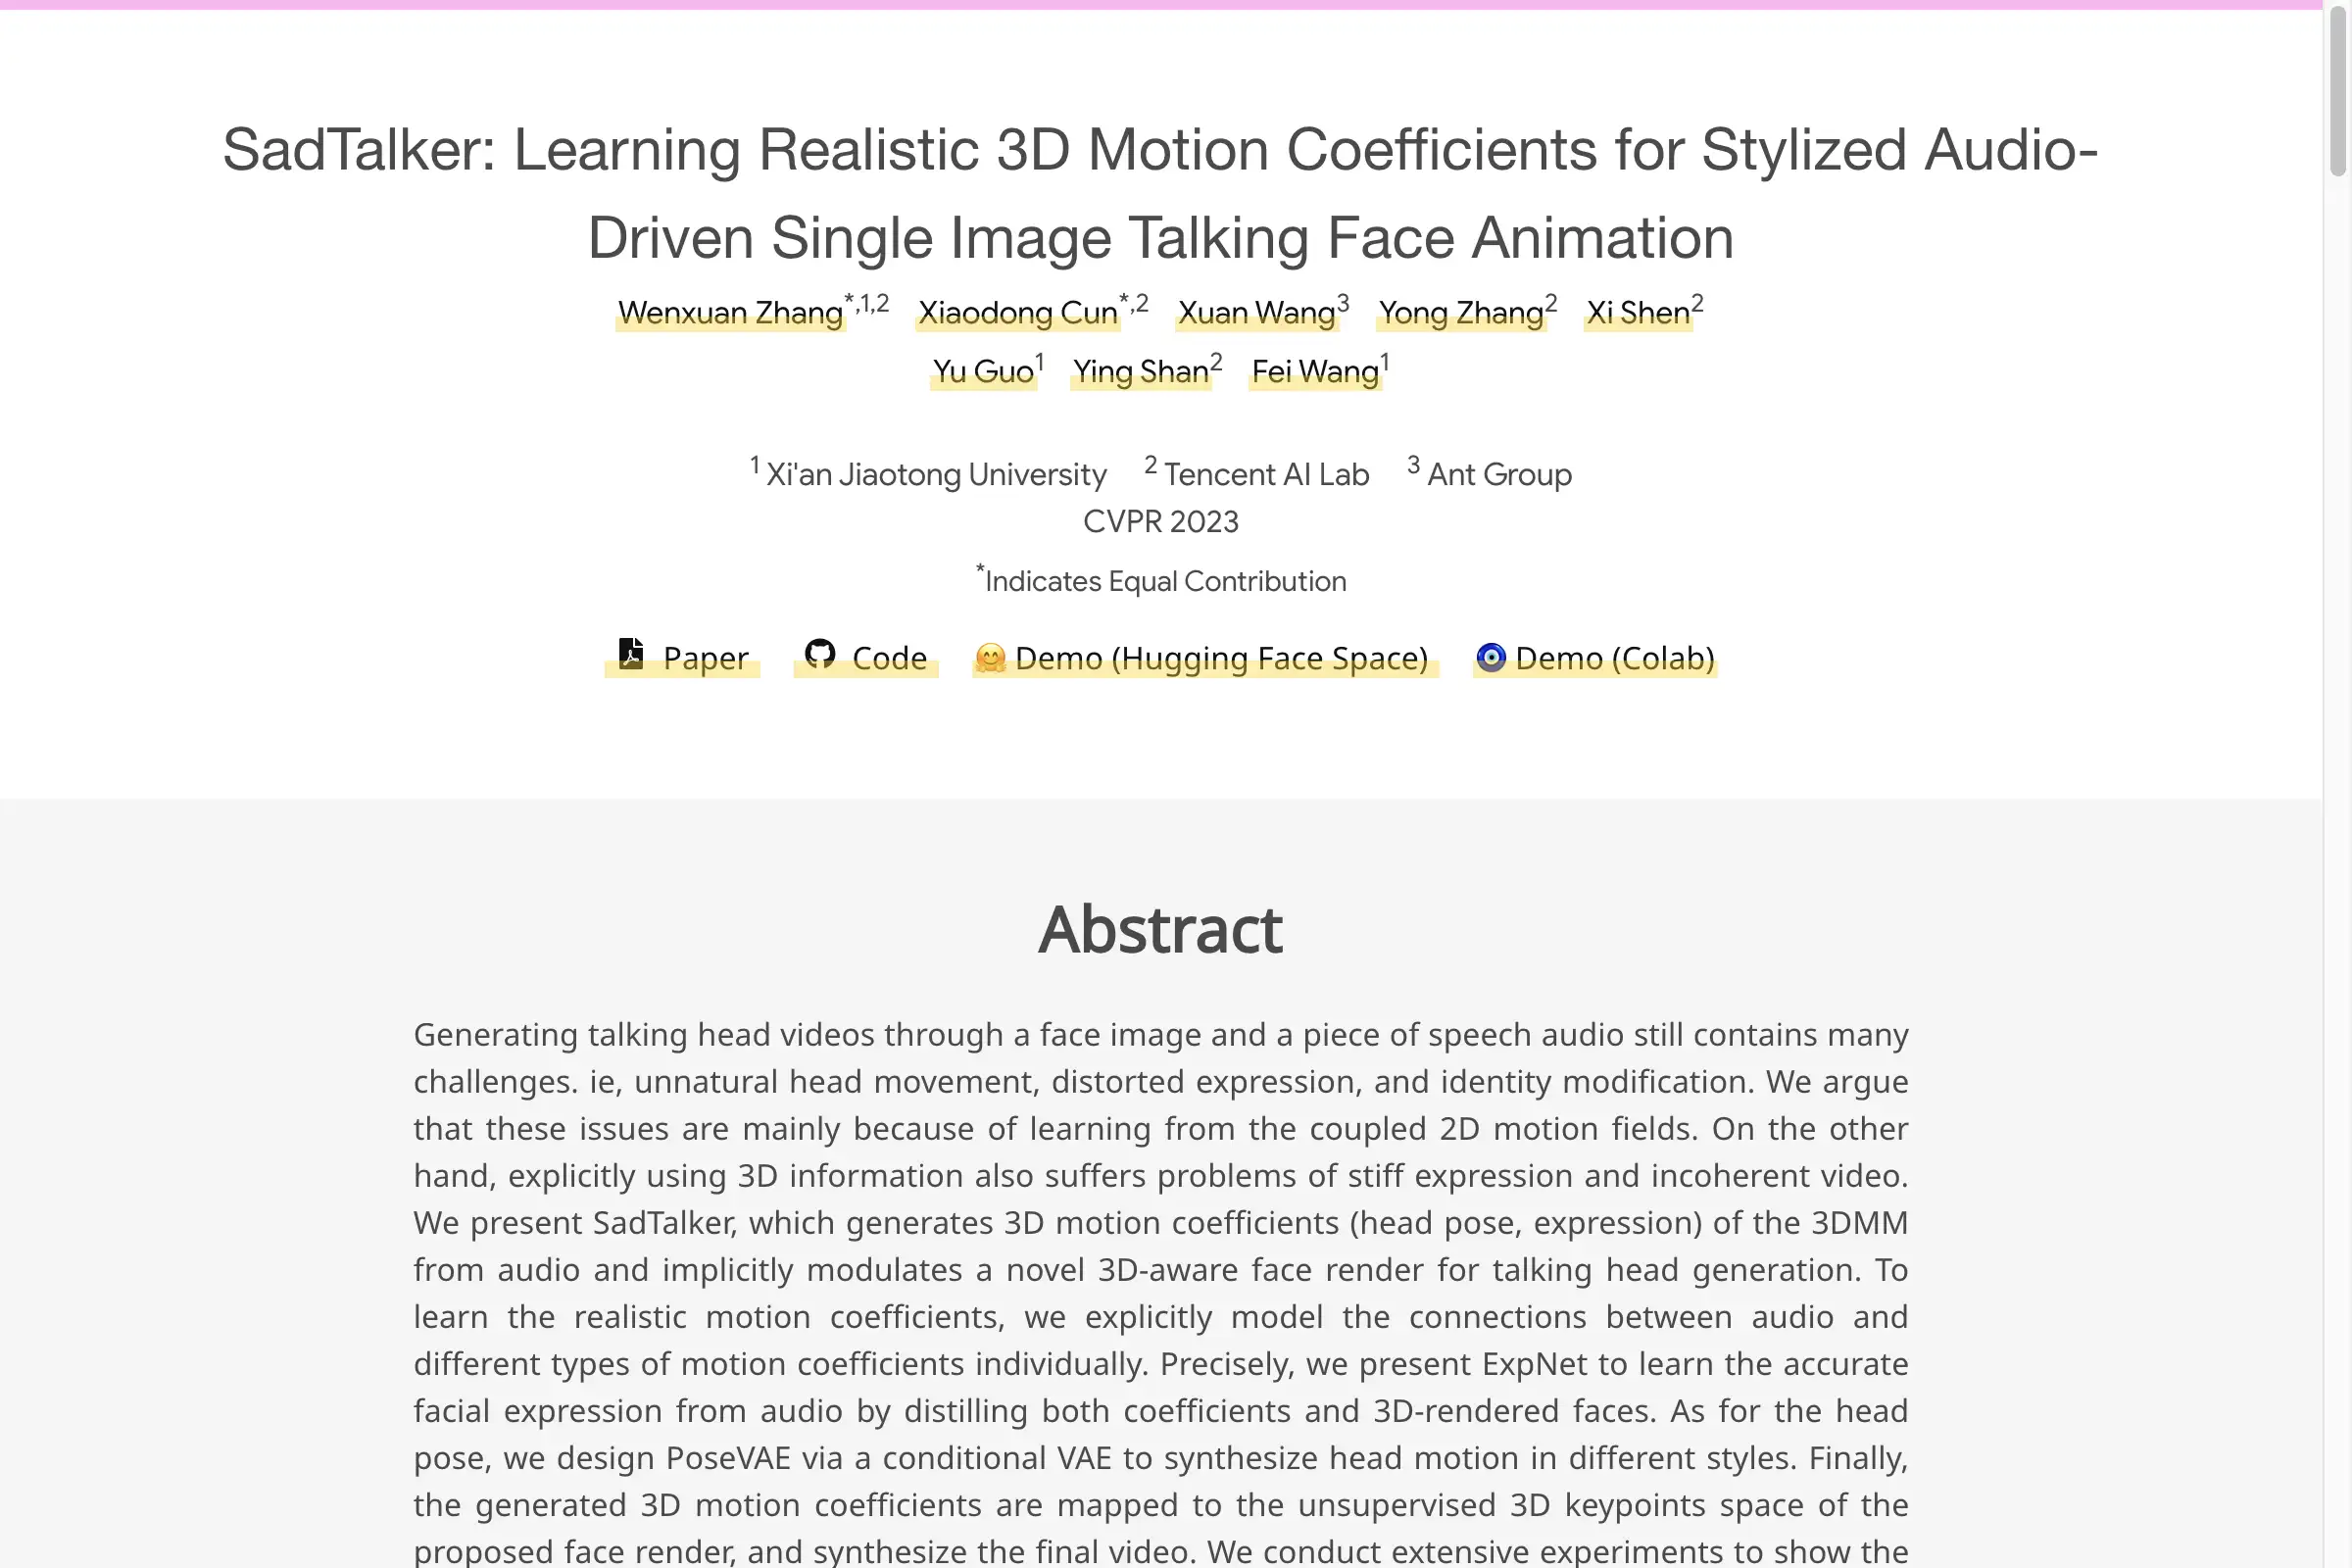 SadTalker: Learning Realistic 3D Motion Coefficients for Stylized Audio-Driven Single Image Talking Face Animation